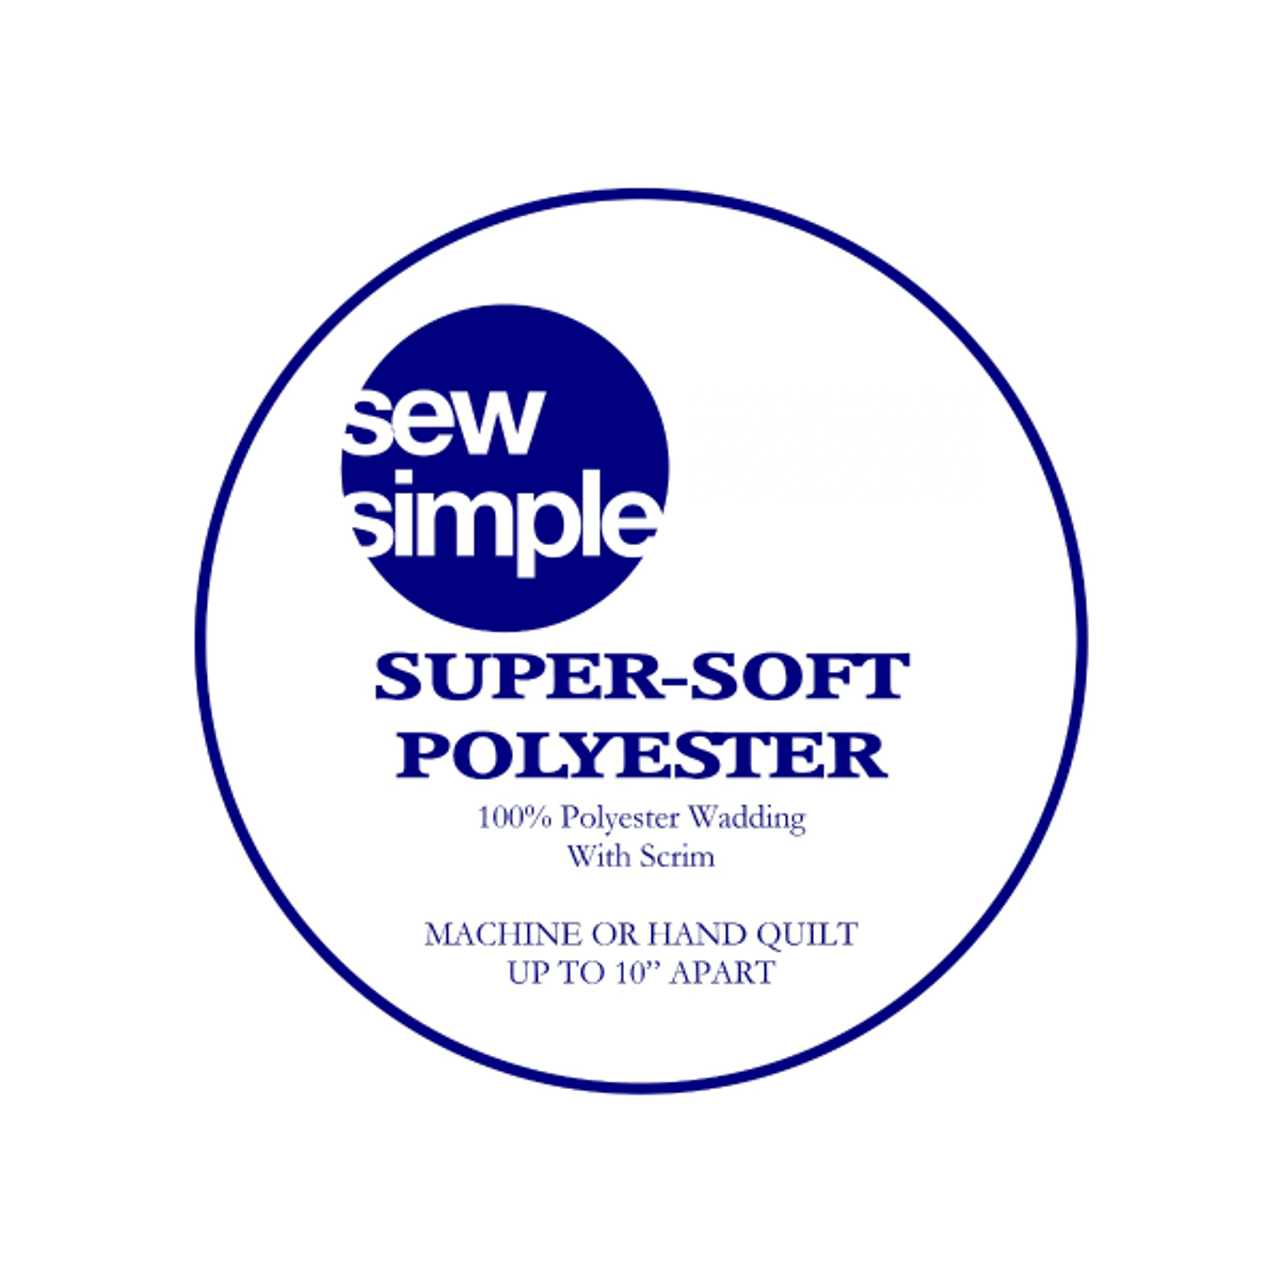 Sew Simple Super-Soft 100% Polyester Wadding remnants